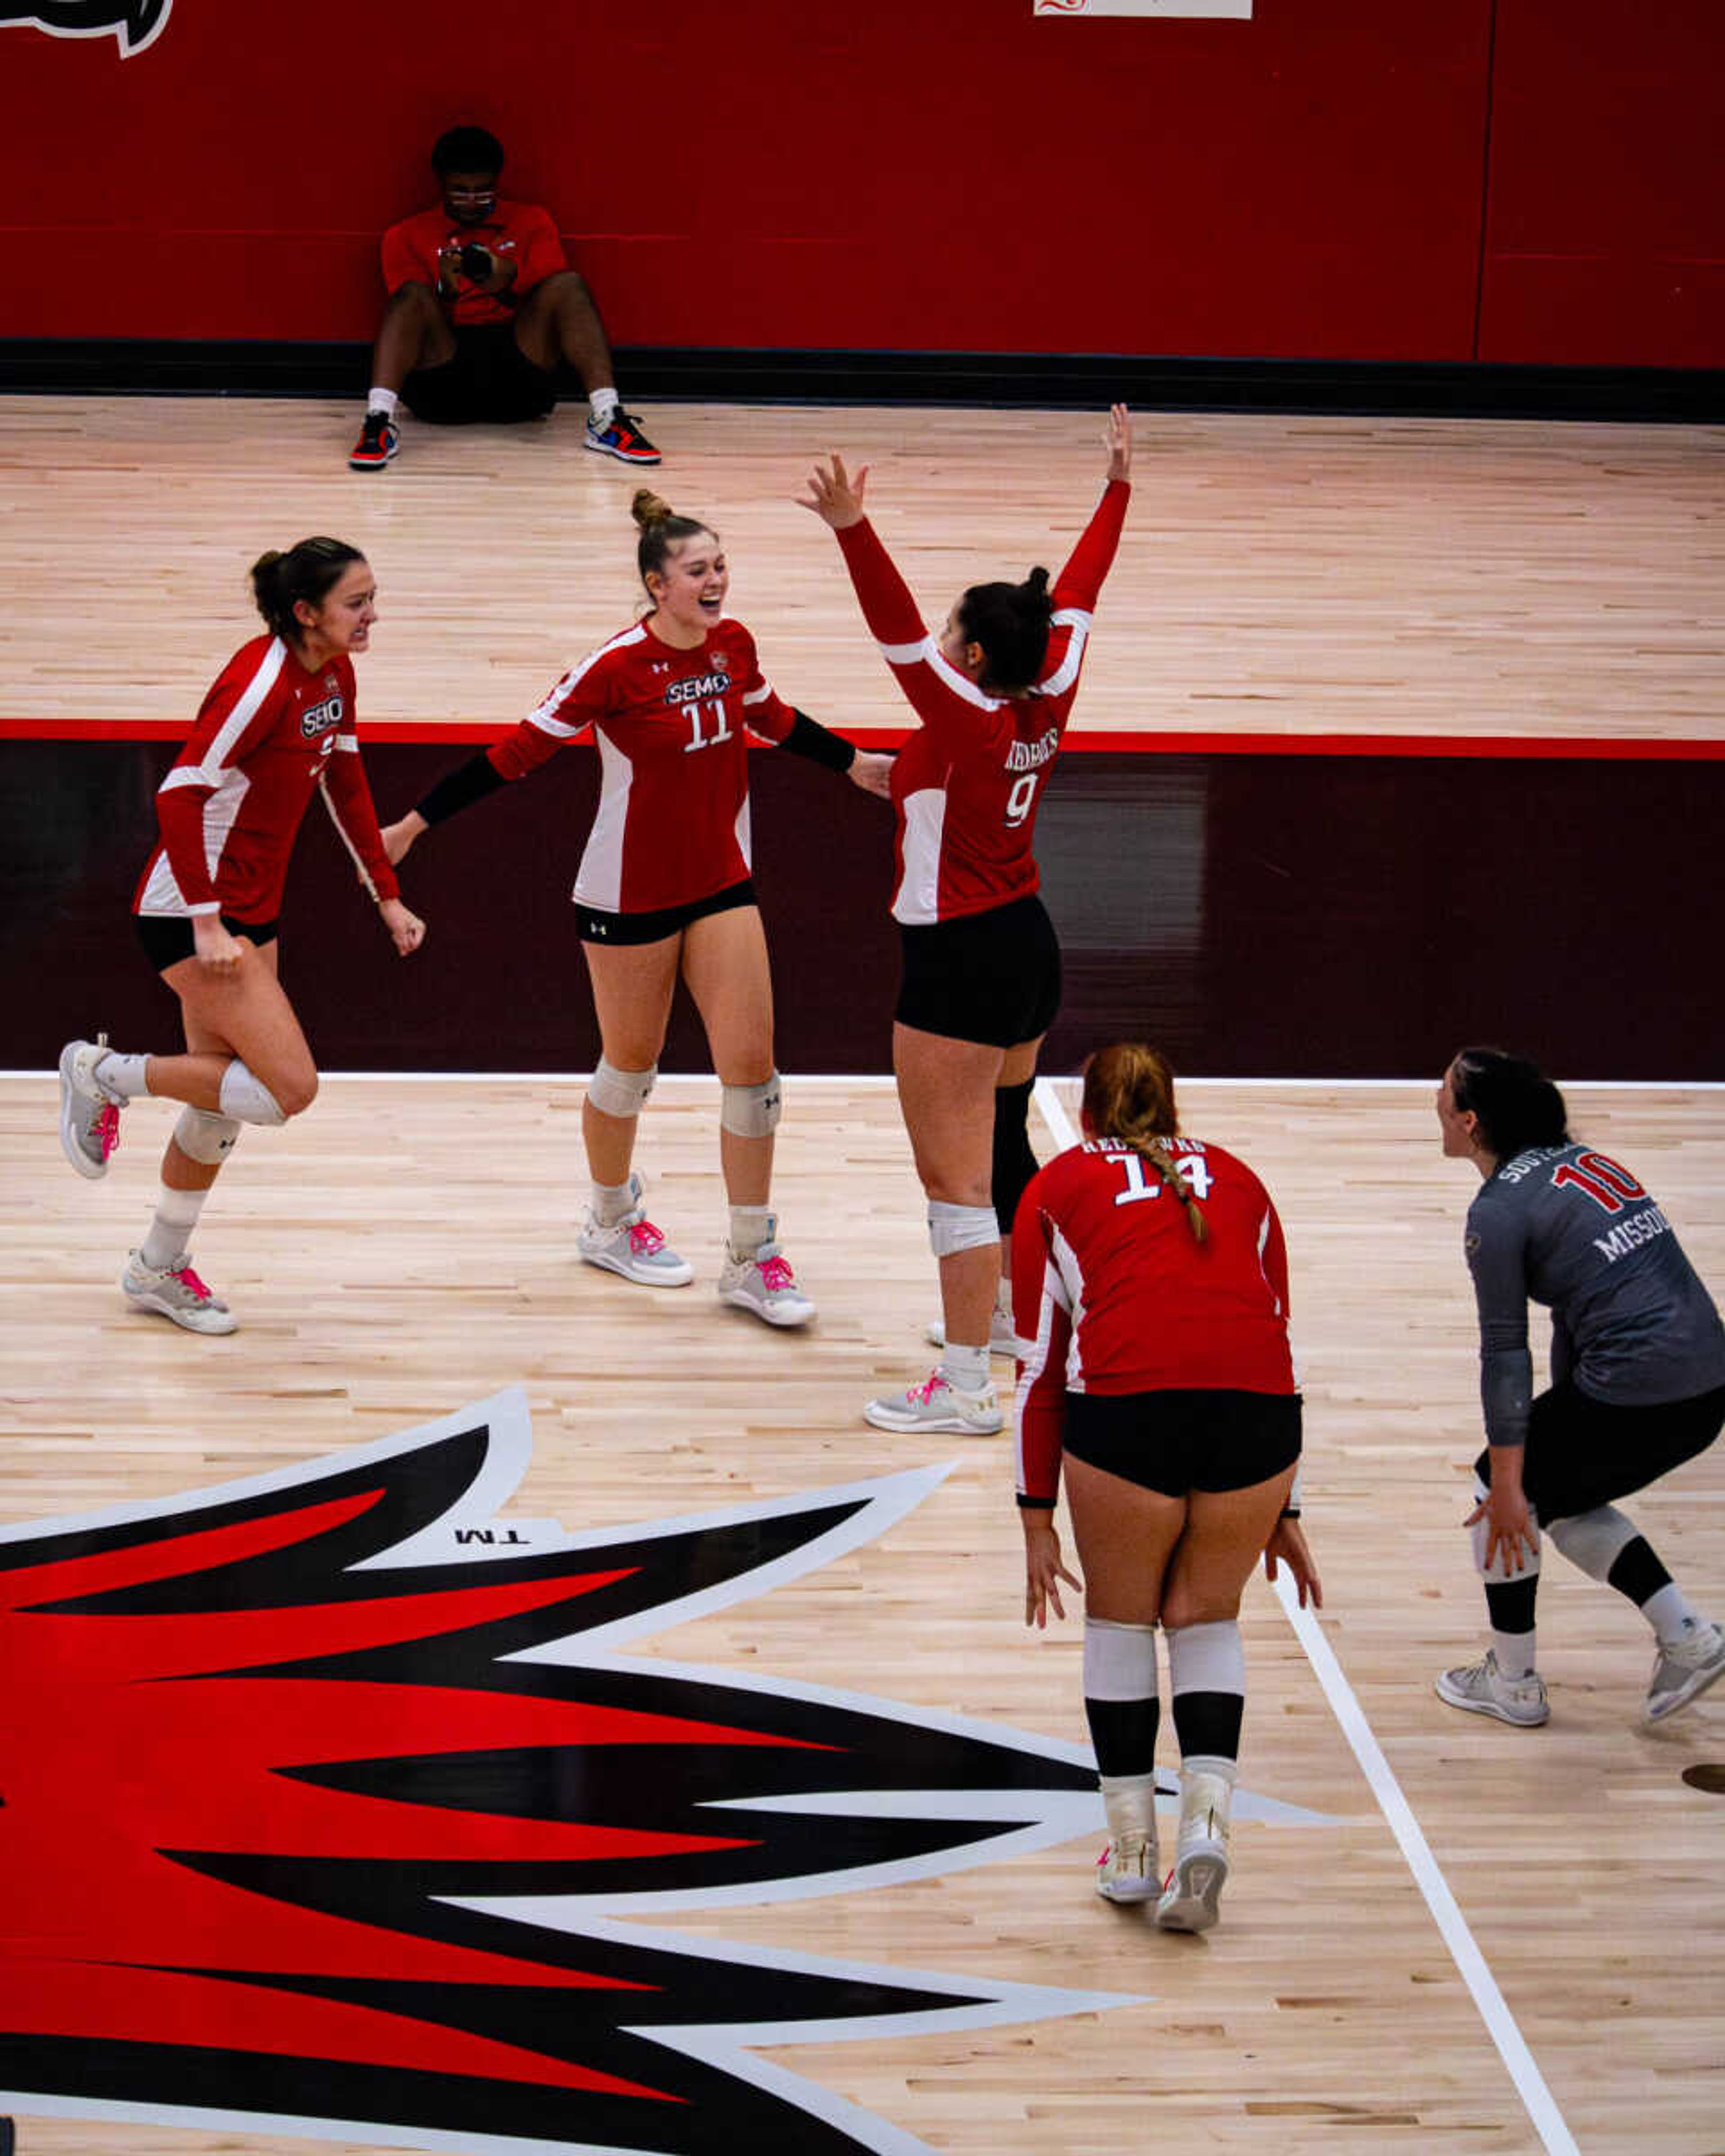 SEMO volleyball teammates celebrate together after scoring a point against the Lindenwood Lions.